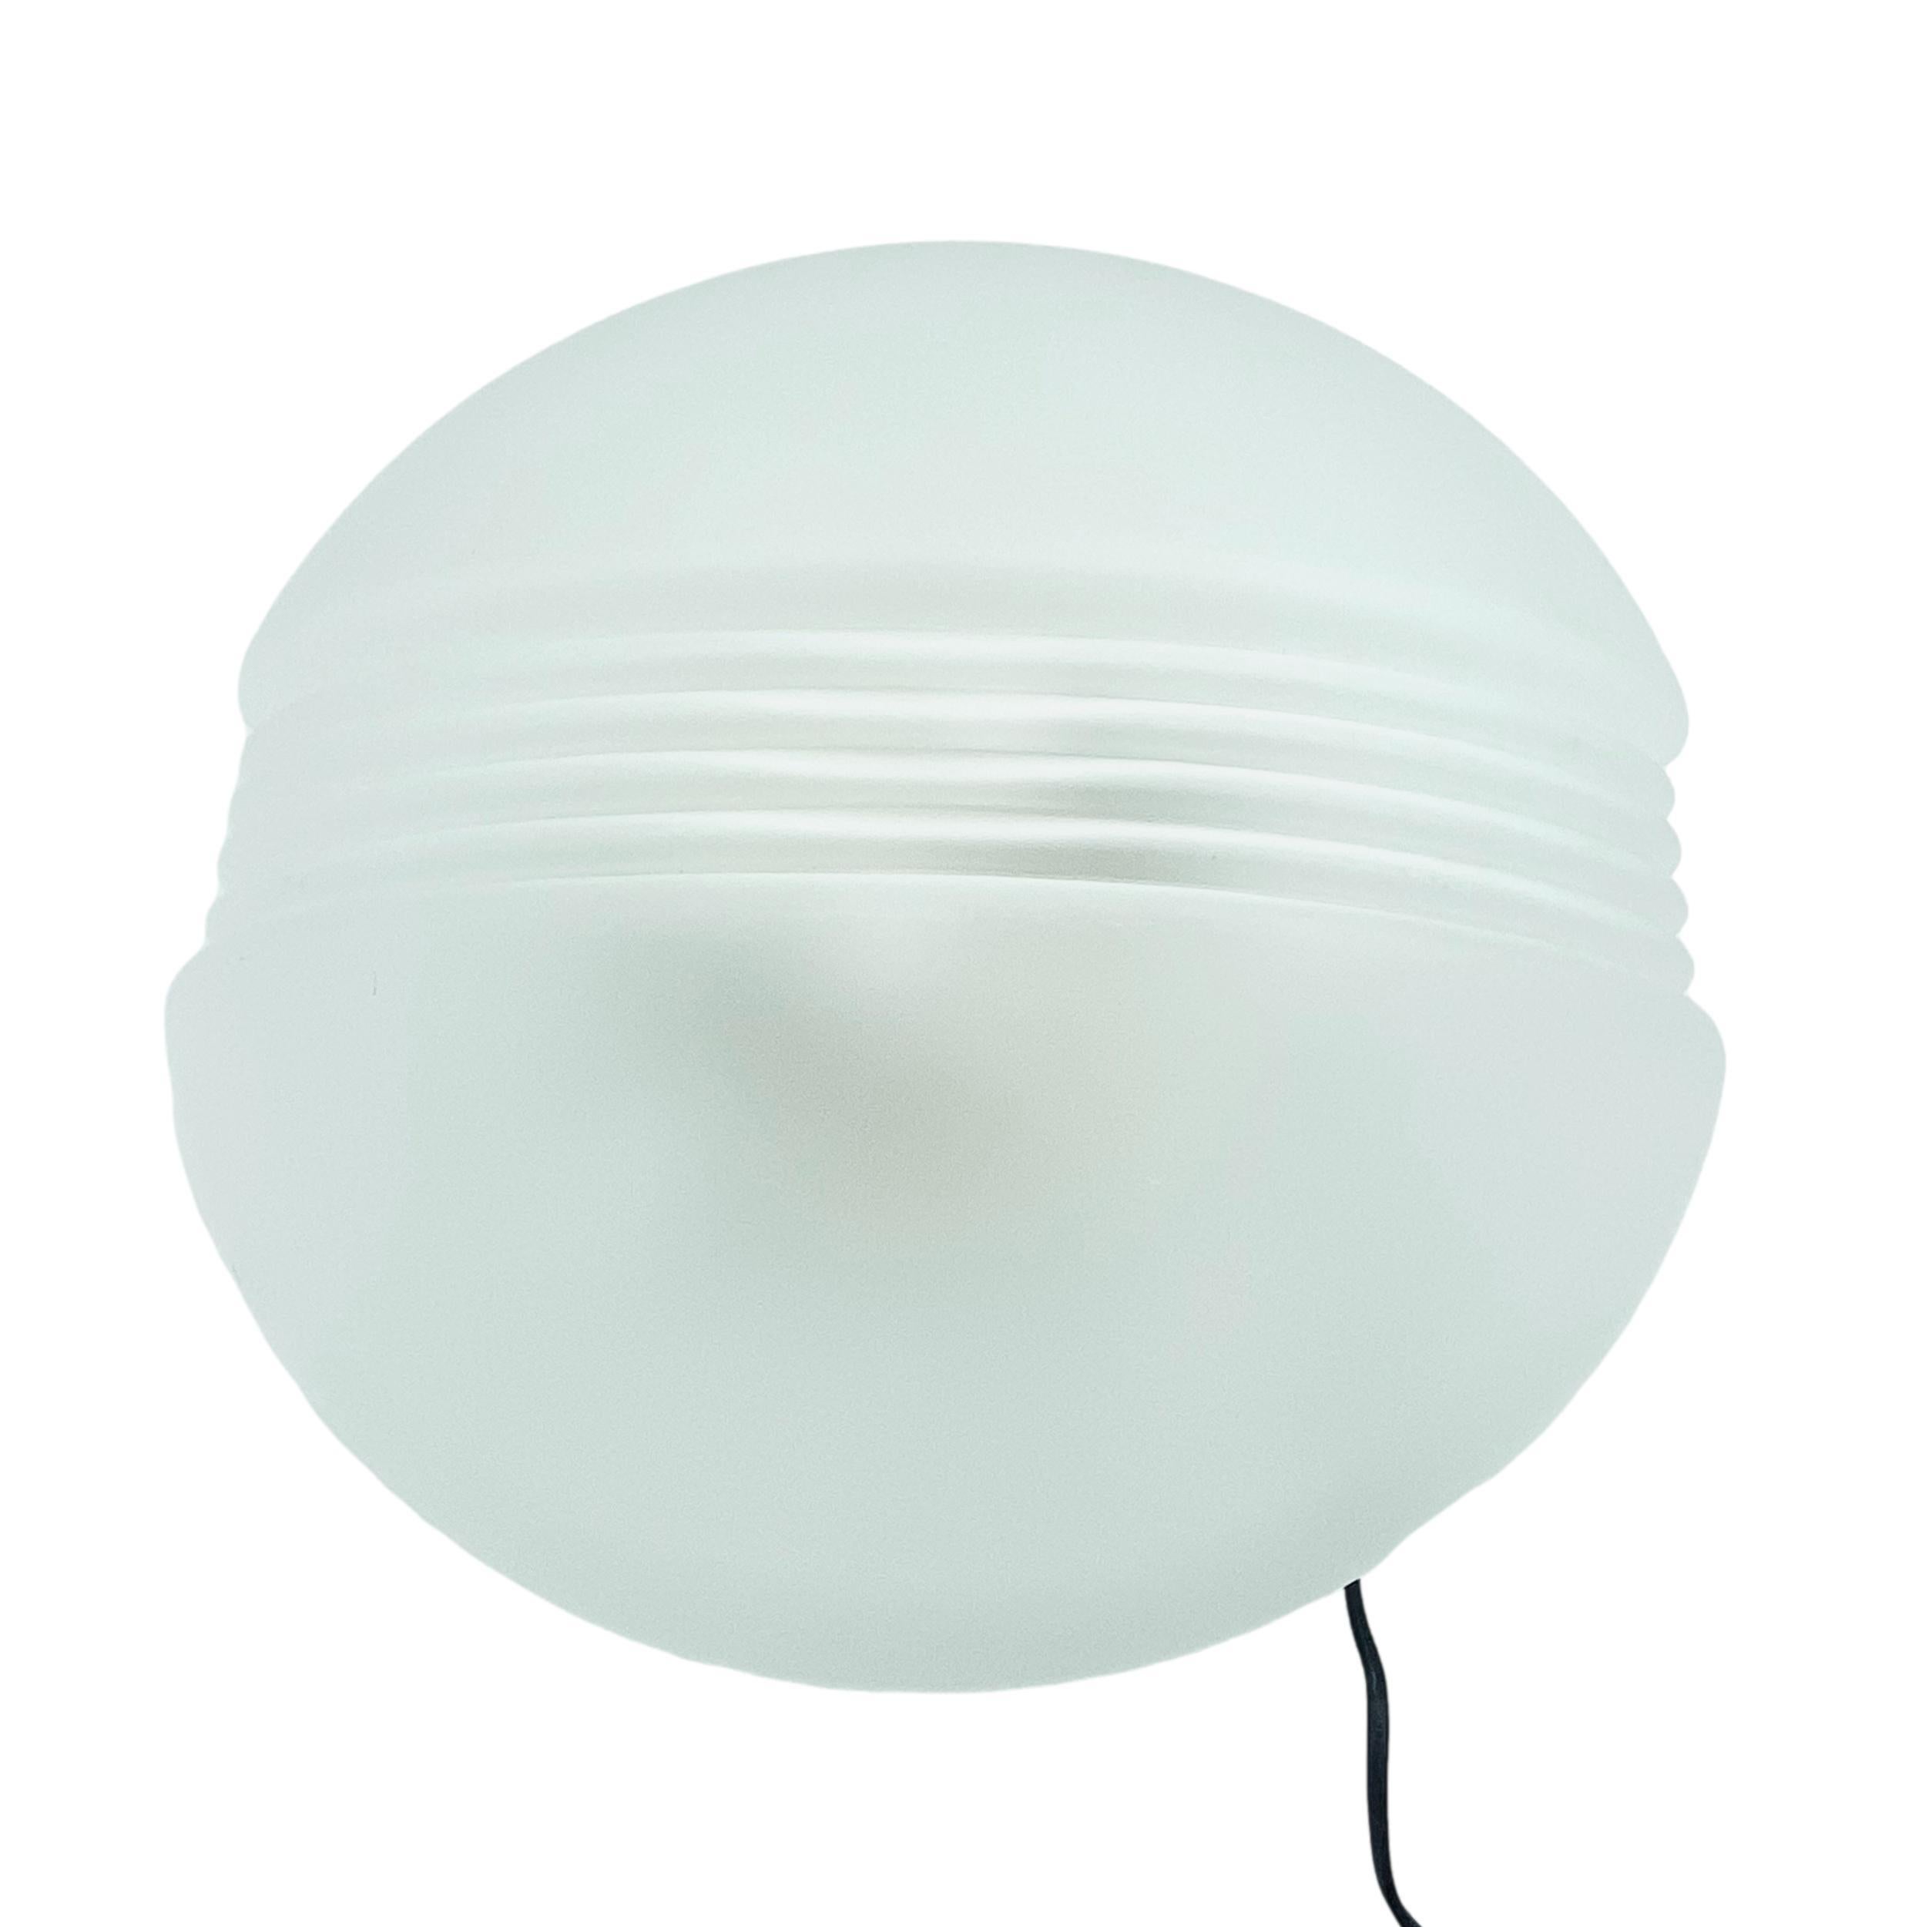 Handcrafted glass ceiling light for installation and wall or ceiling. The diffuser consists of a single polished piece with a rounded shape. The shape of the satin-blown glass diffuser makes it perfect for ambient lighting.


